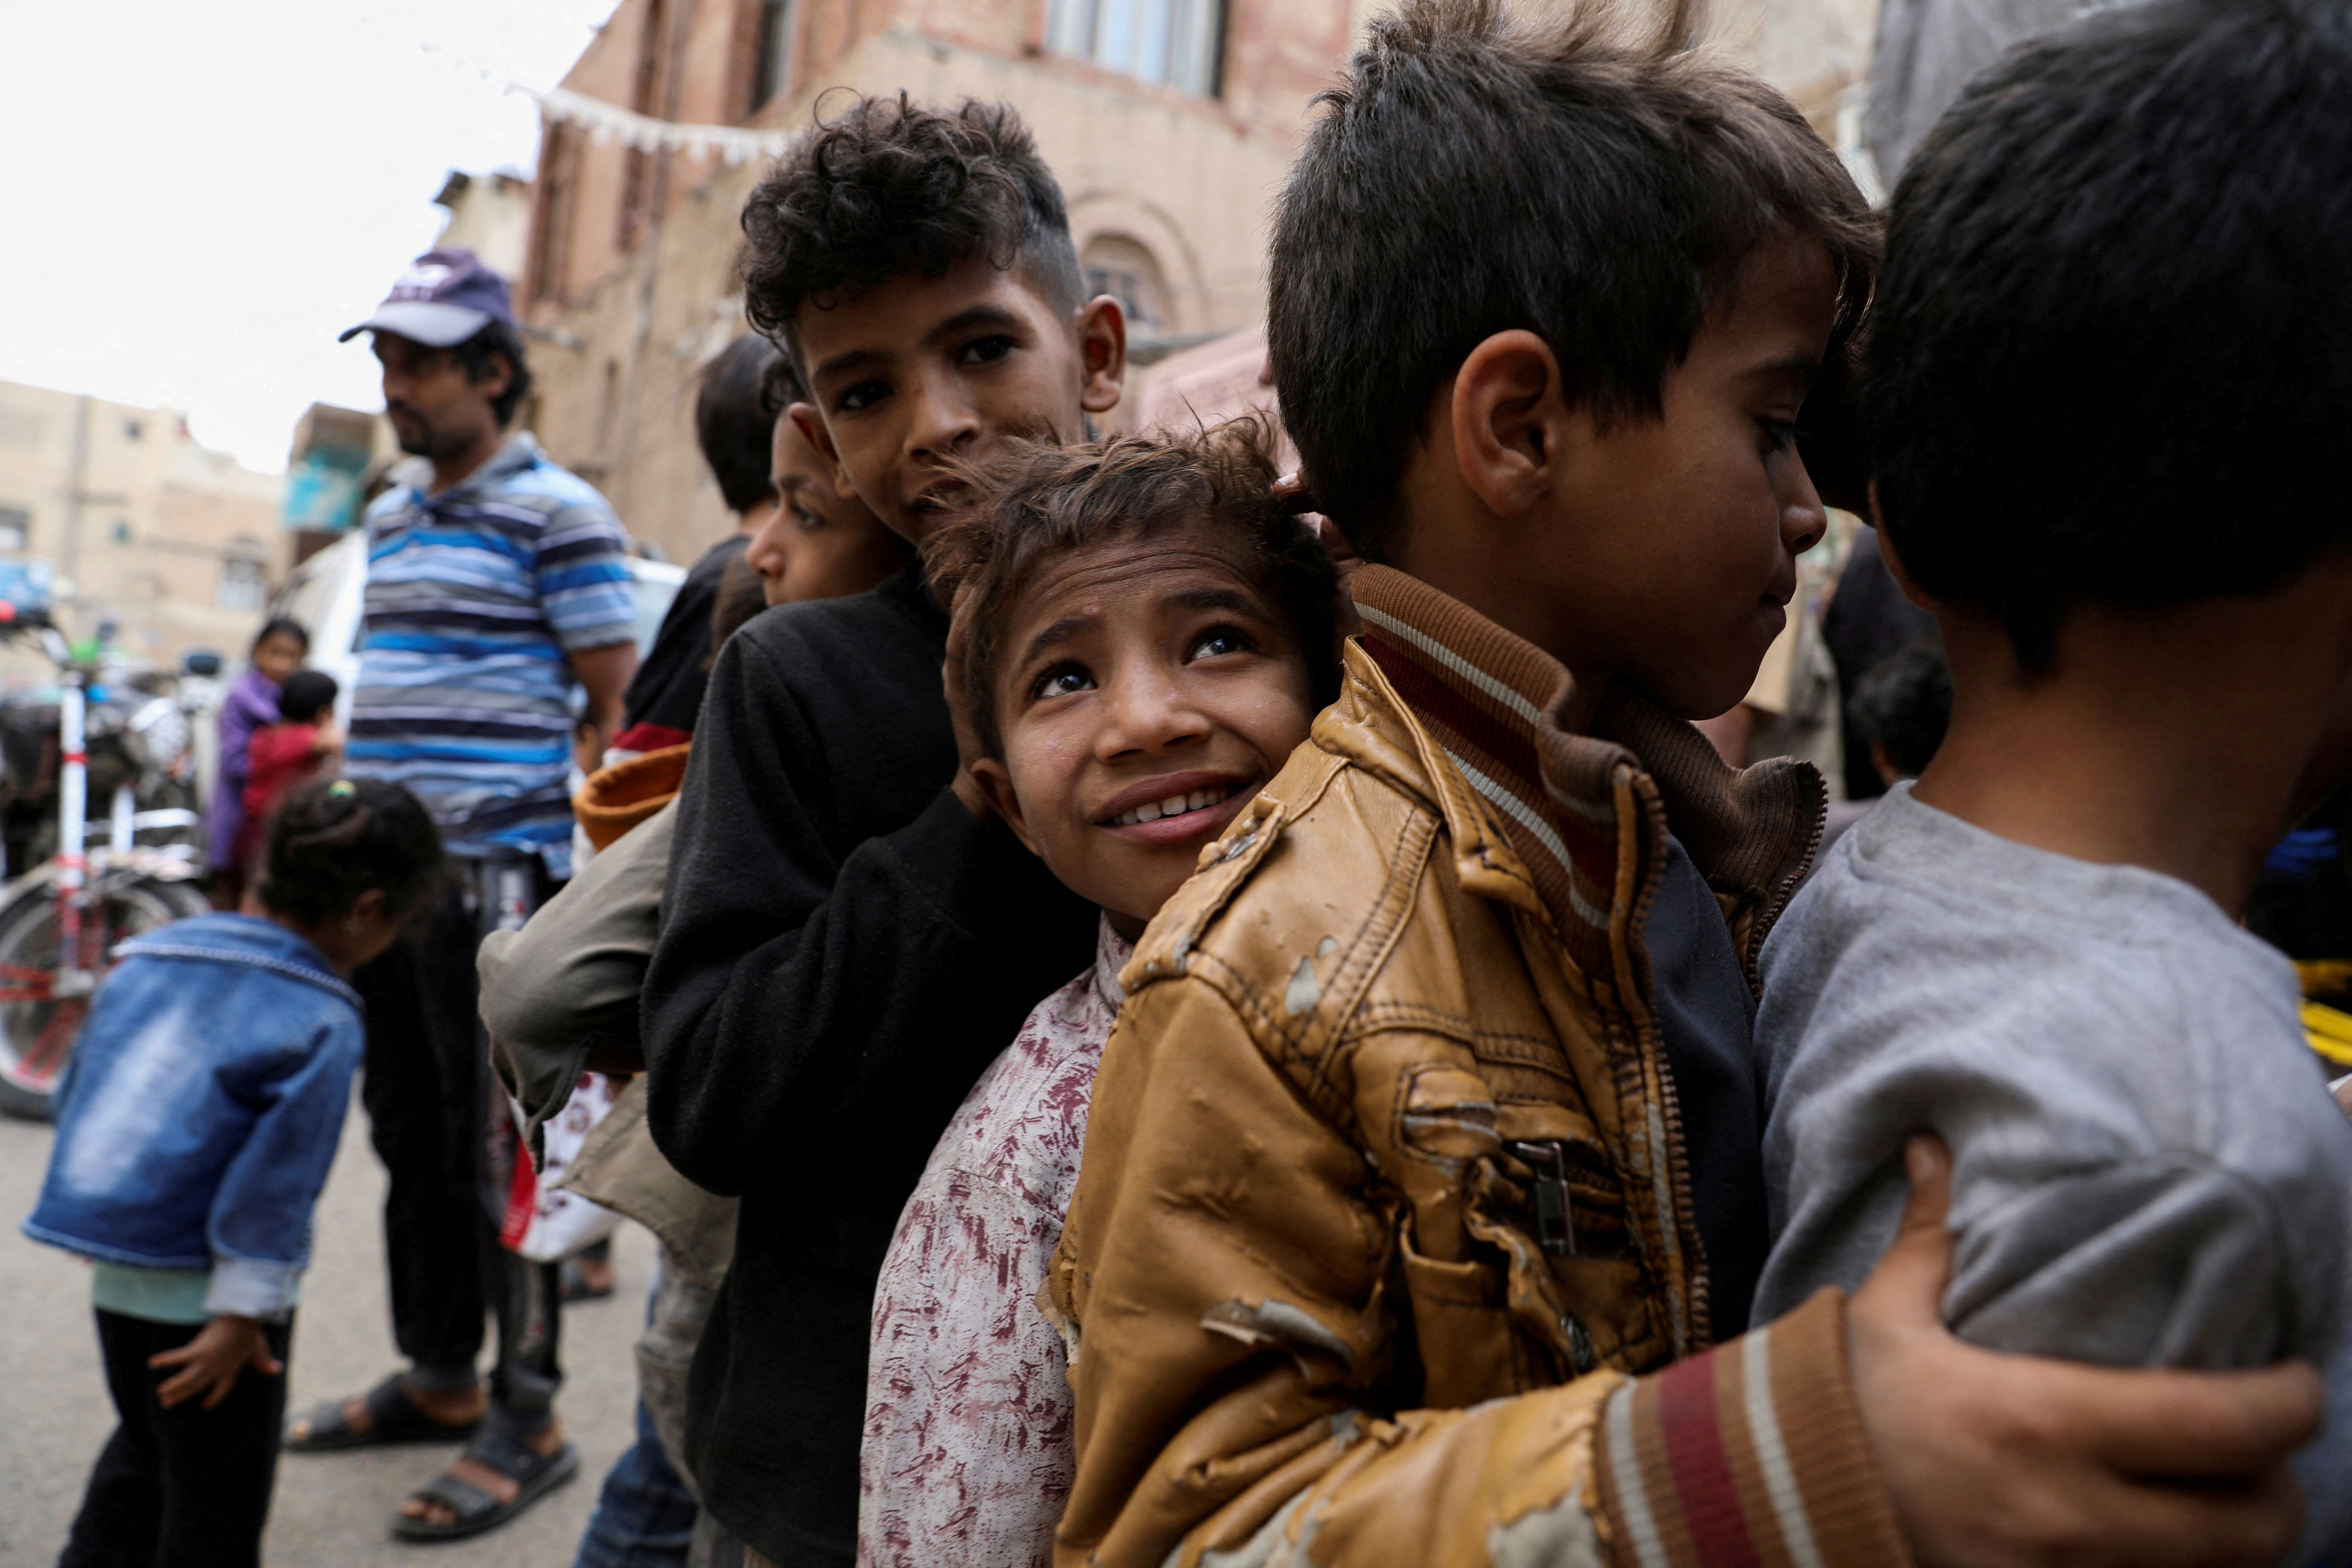 Boys stand in line as they wait to receive meals from a charity kitchen during the holy month of Ramadan in Sanaa